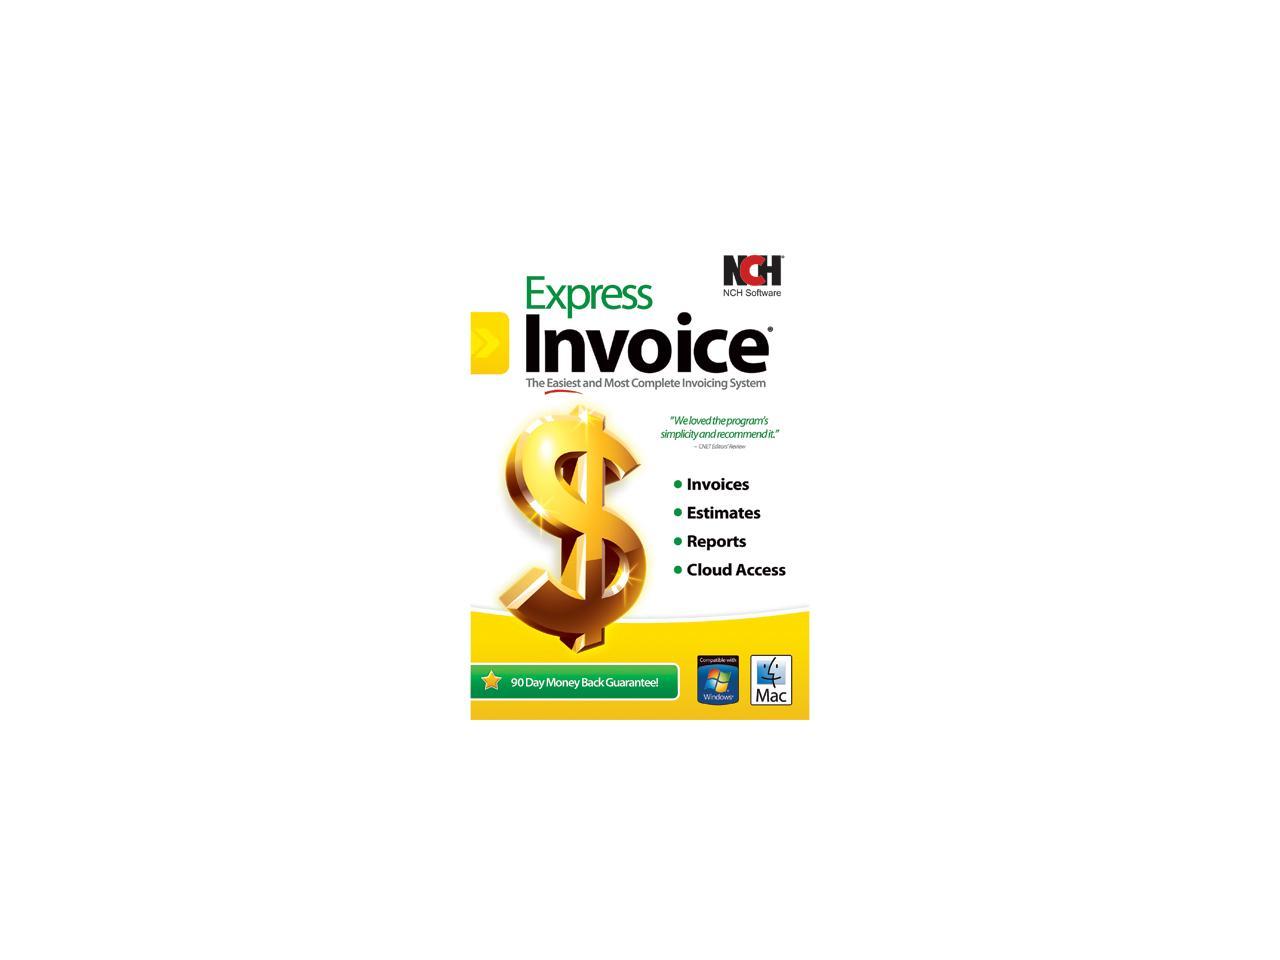 nch software express invoice reviews